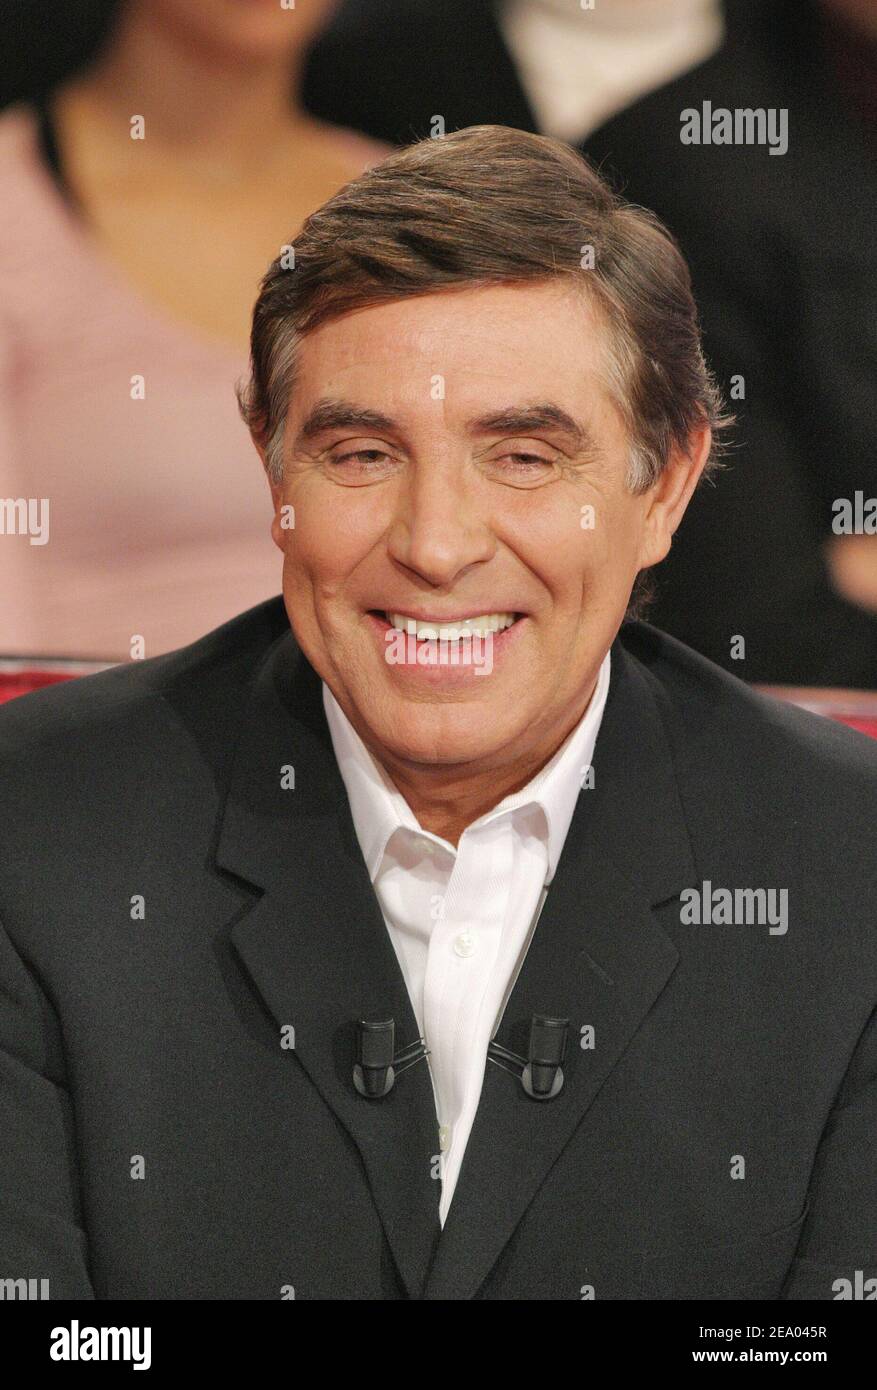 French TV presenter Jean-Pierre Foucault attends Michel Drucker's talks  show Vivement Dimanche recorded at Studio Gabriel in Paris, France on  February 23, 2005. Photo by Jean-Jacques Datchary/ABACA Stock Photo - Alamy